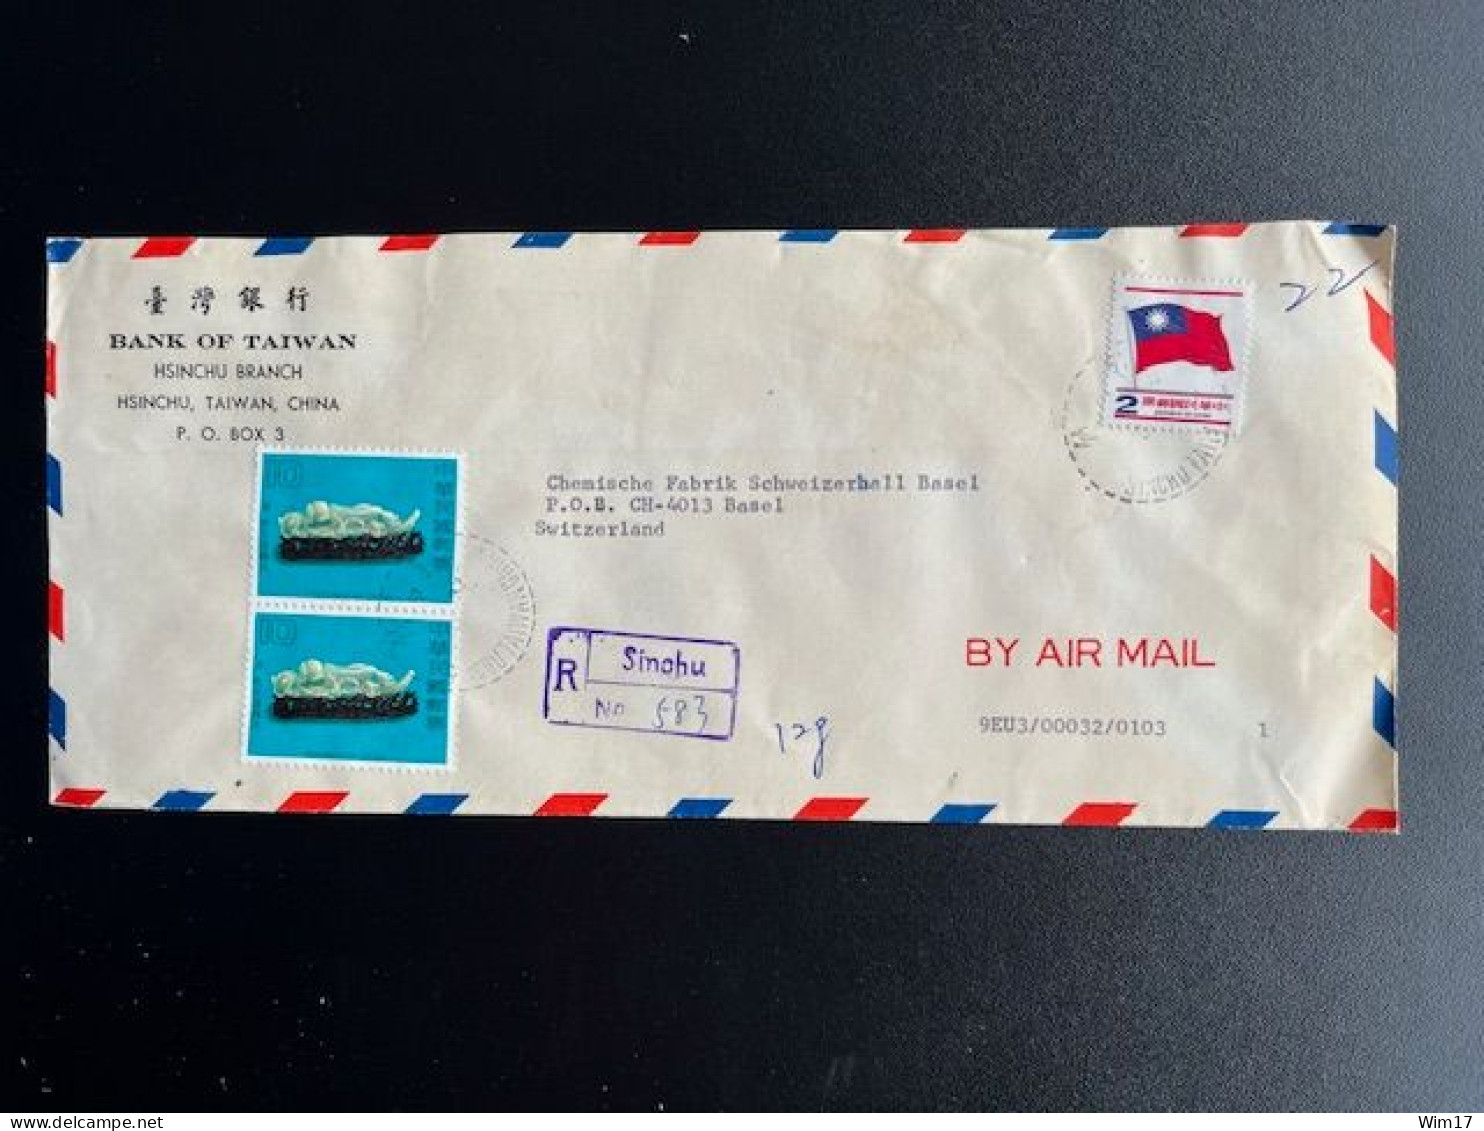 TAIWAN FORMOSA CHINA 1979 REGISTERED AIR MAIL LETTER HSINCHU TO BASEL SWITZERLAND - Covers & Documents